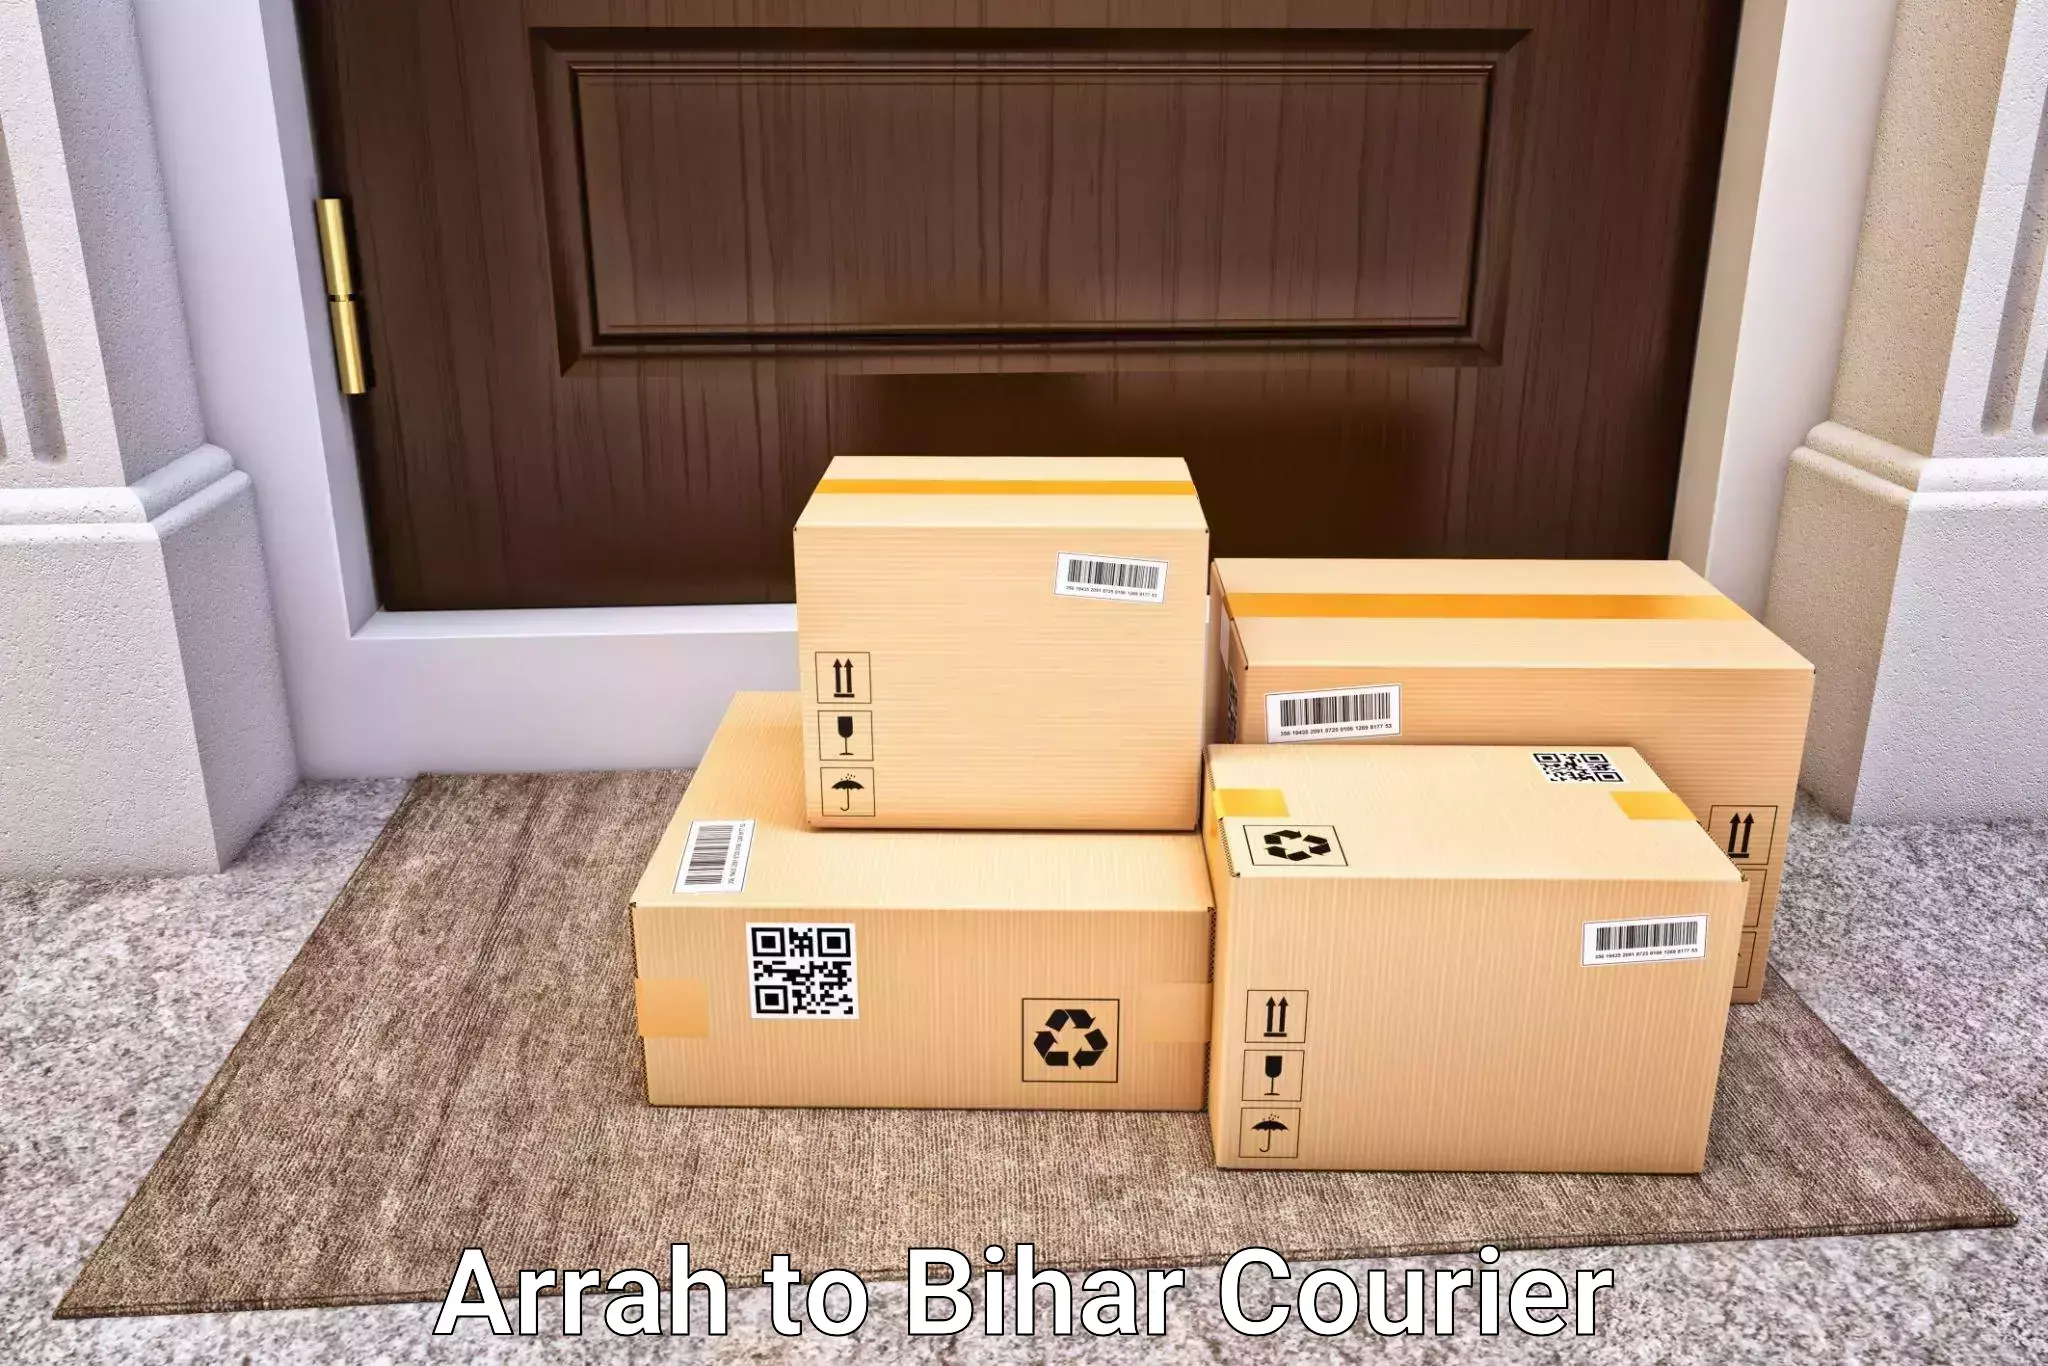 Instant baggage transport quote Arrah to Chakai